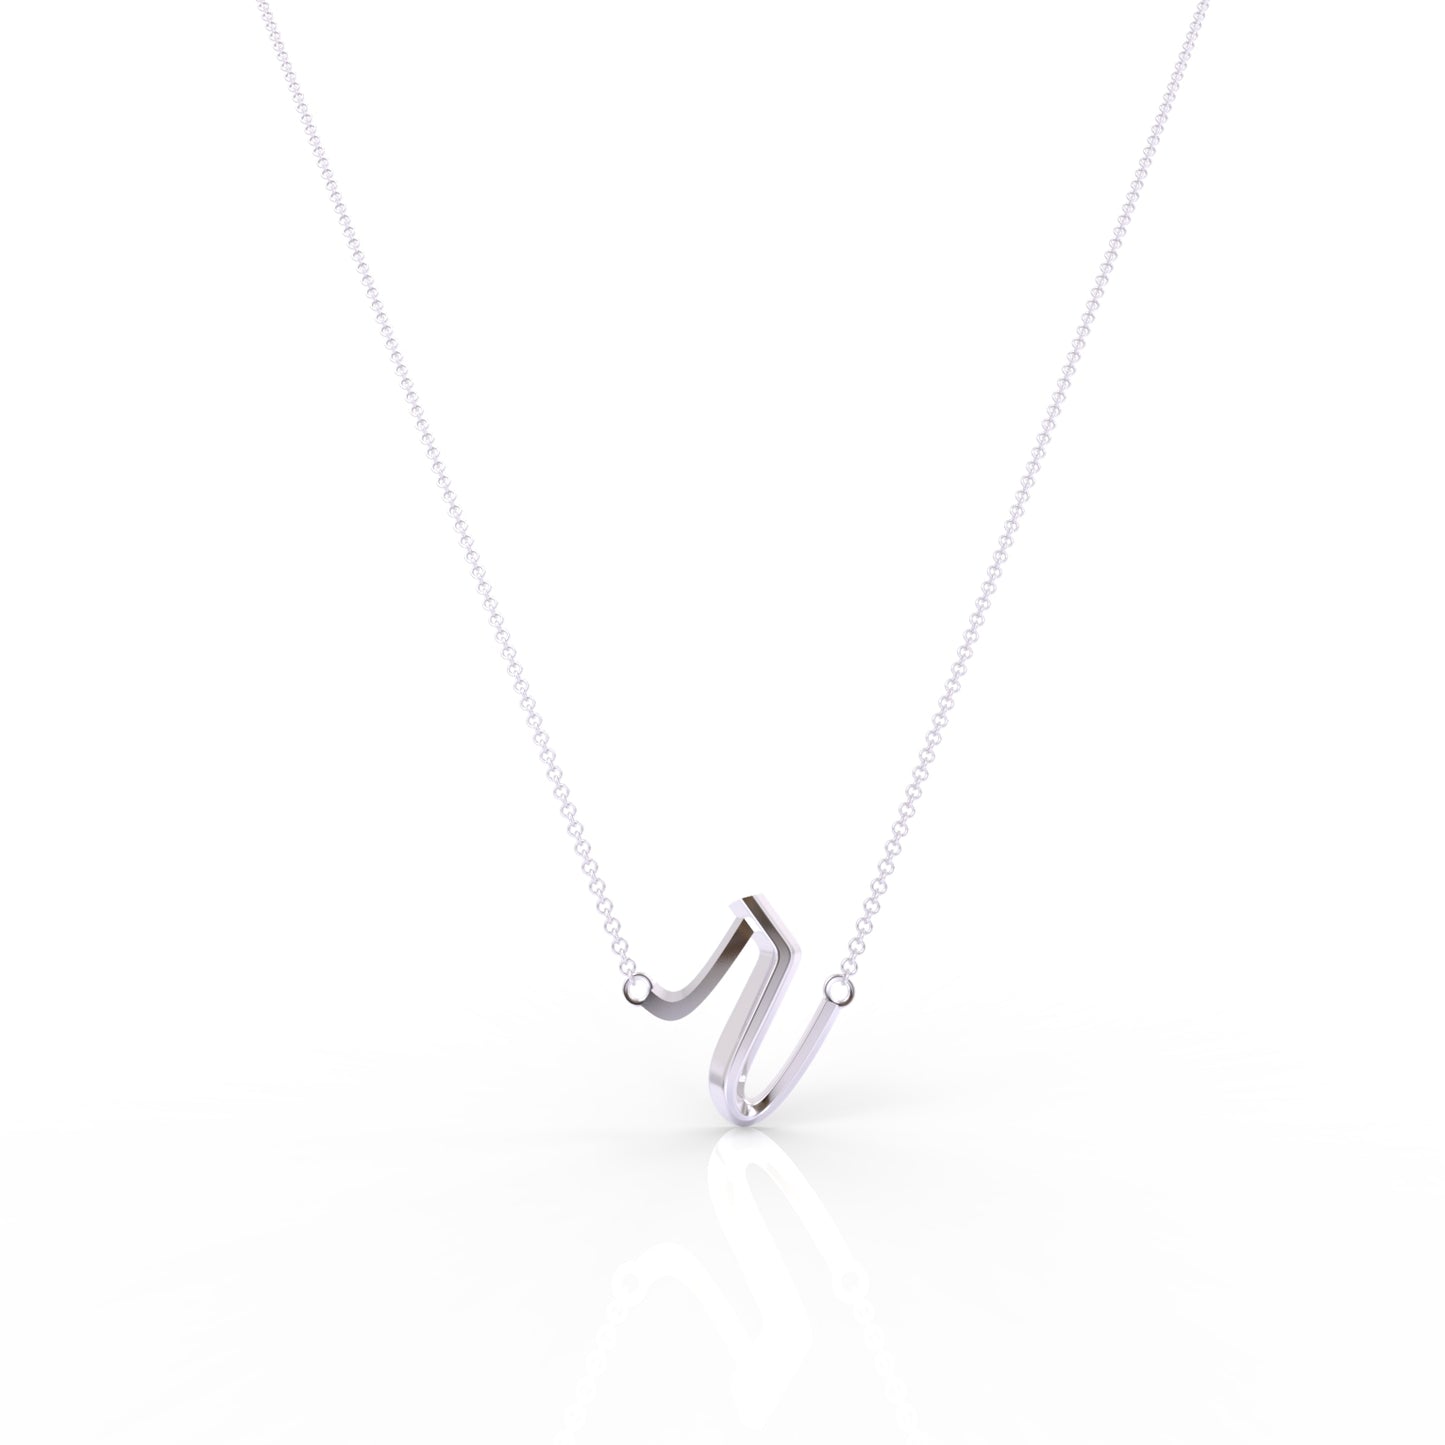 The Love Collect - "R" Necklace